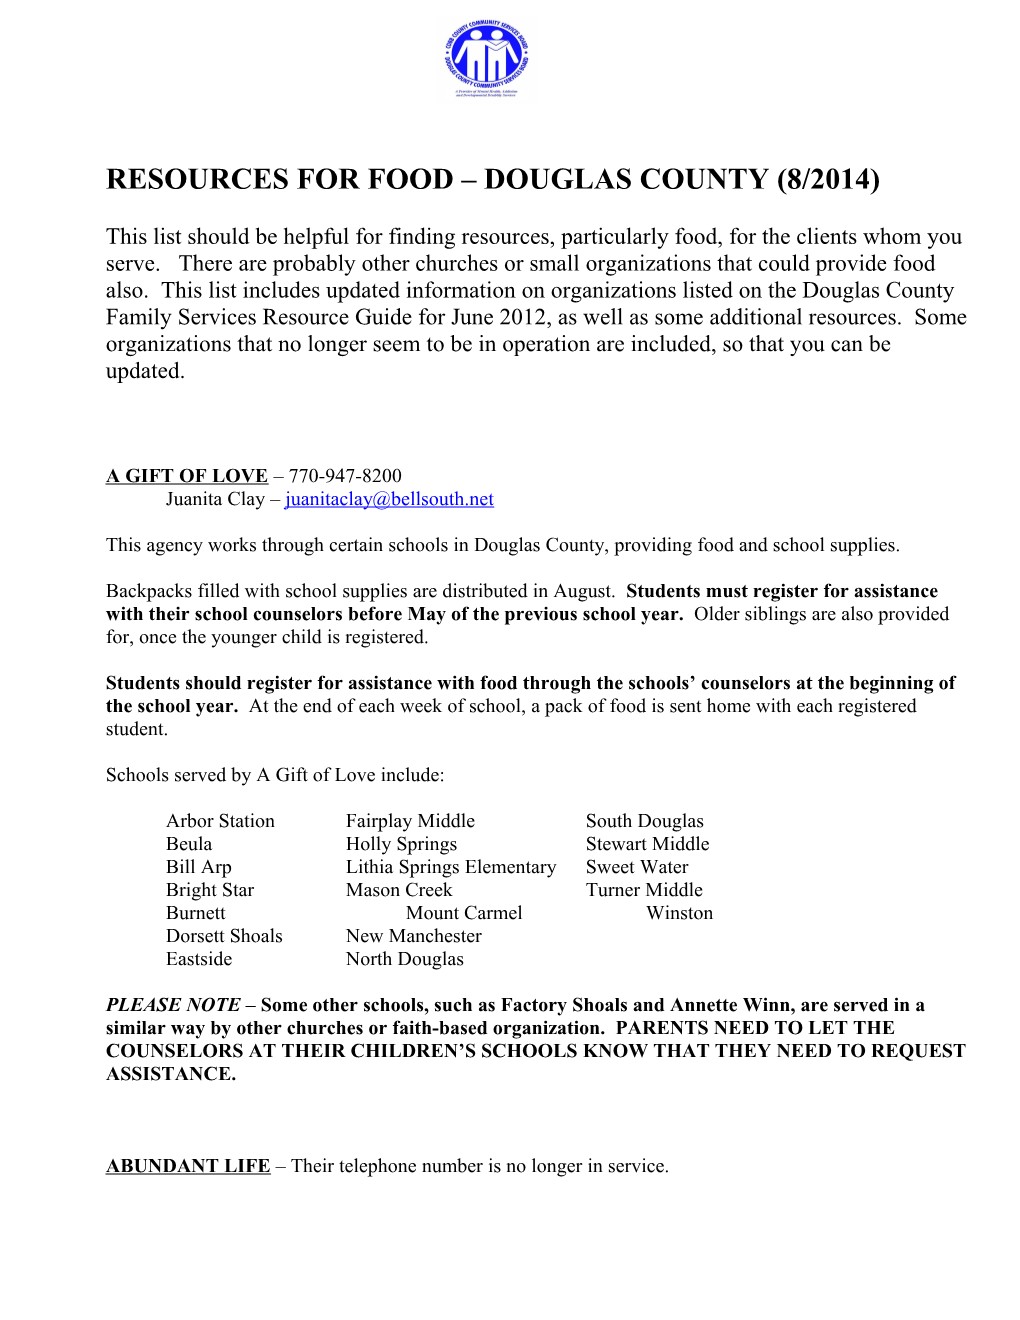 Resources for Food Douglascounty (8/2014)